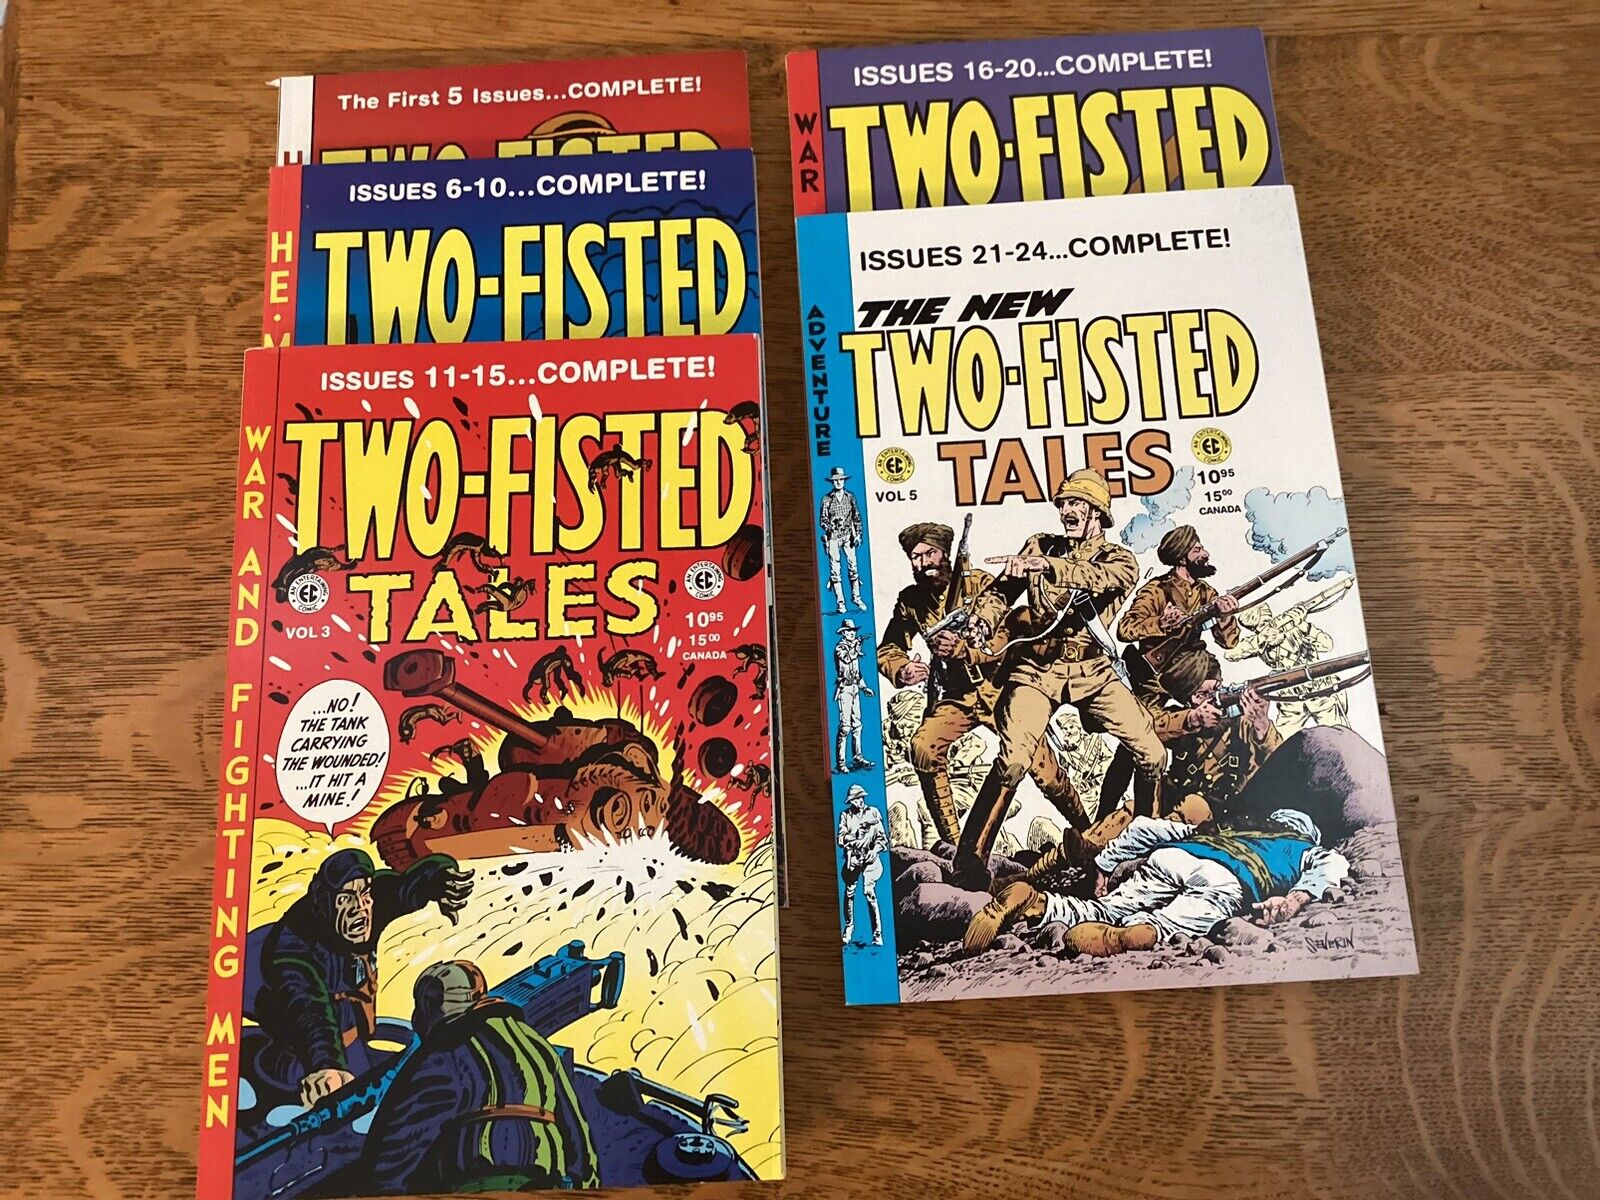 Two-Fisted Tales Comics Issues 1-24 Vol 1-5